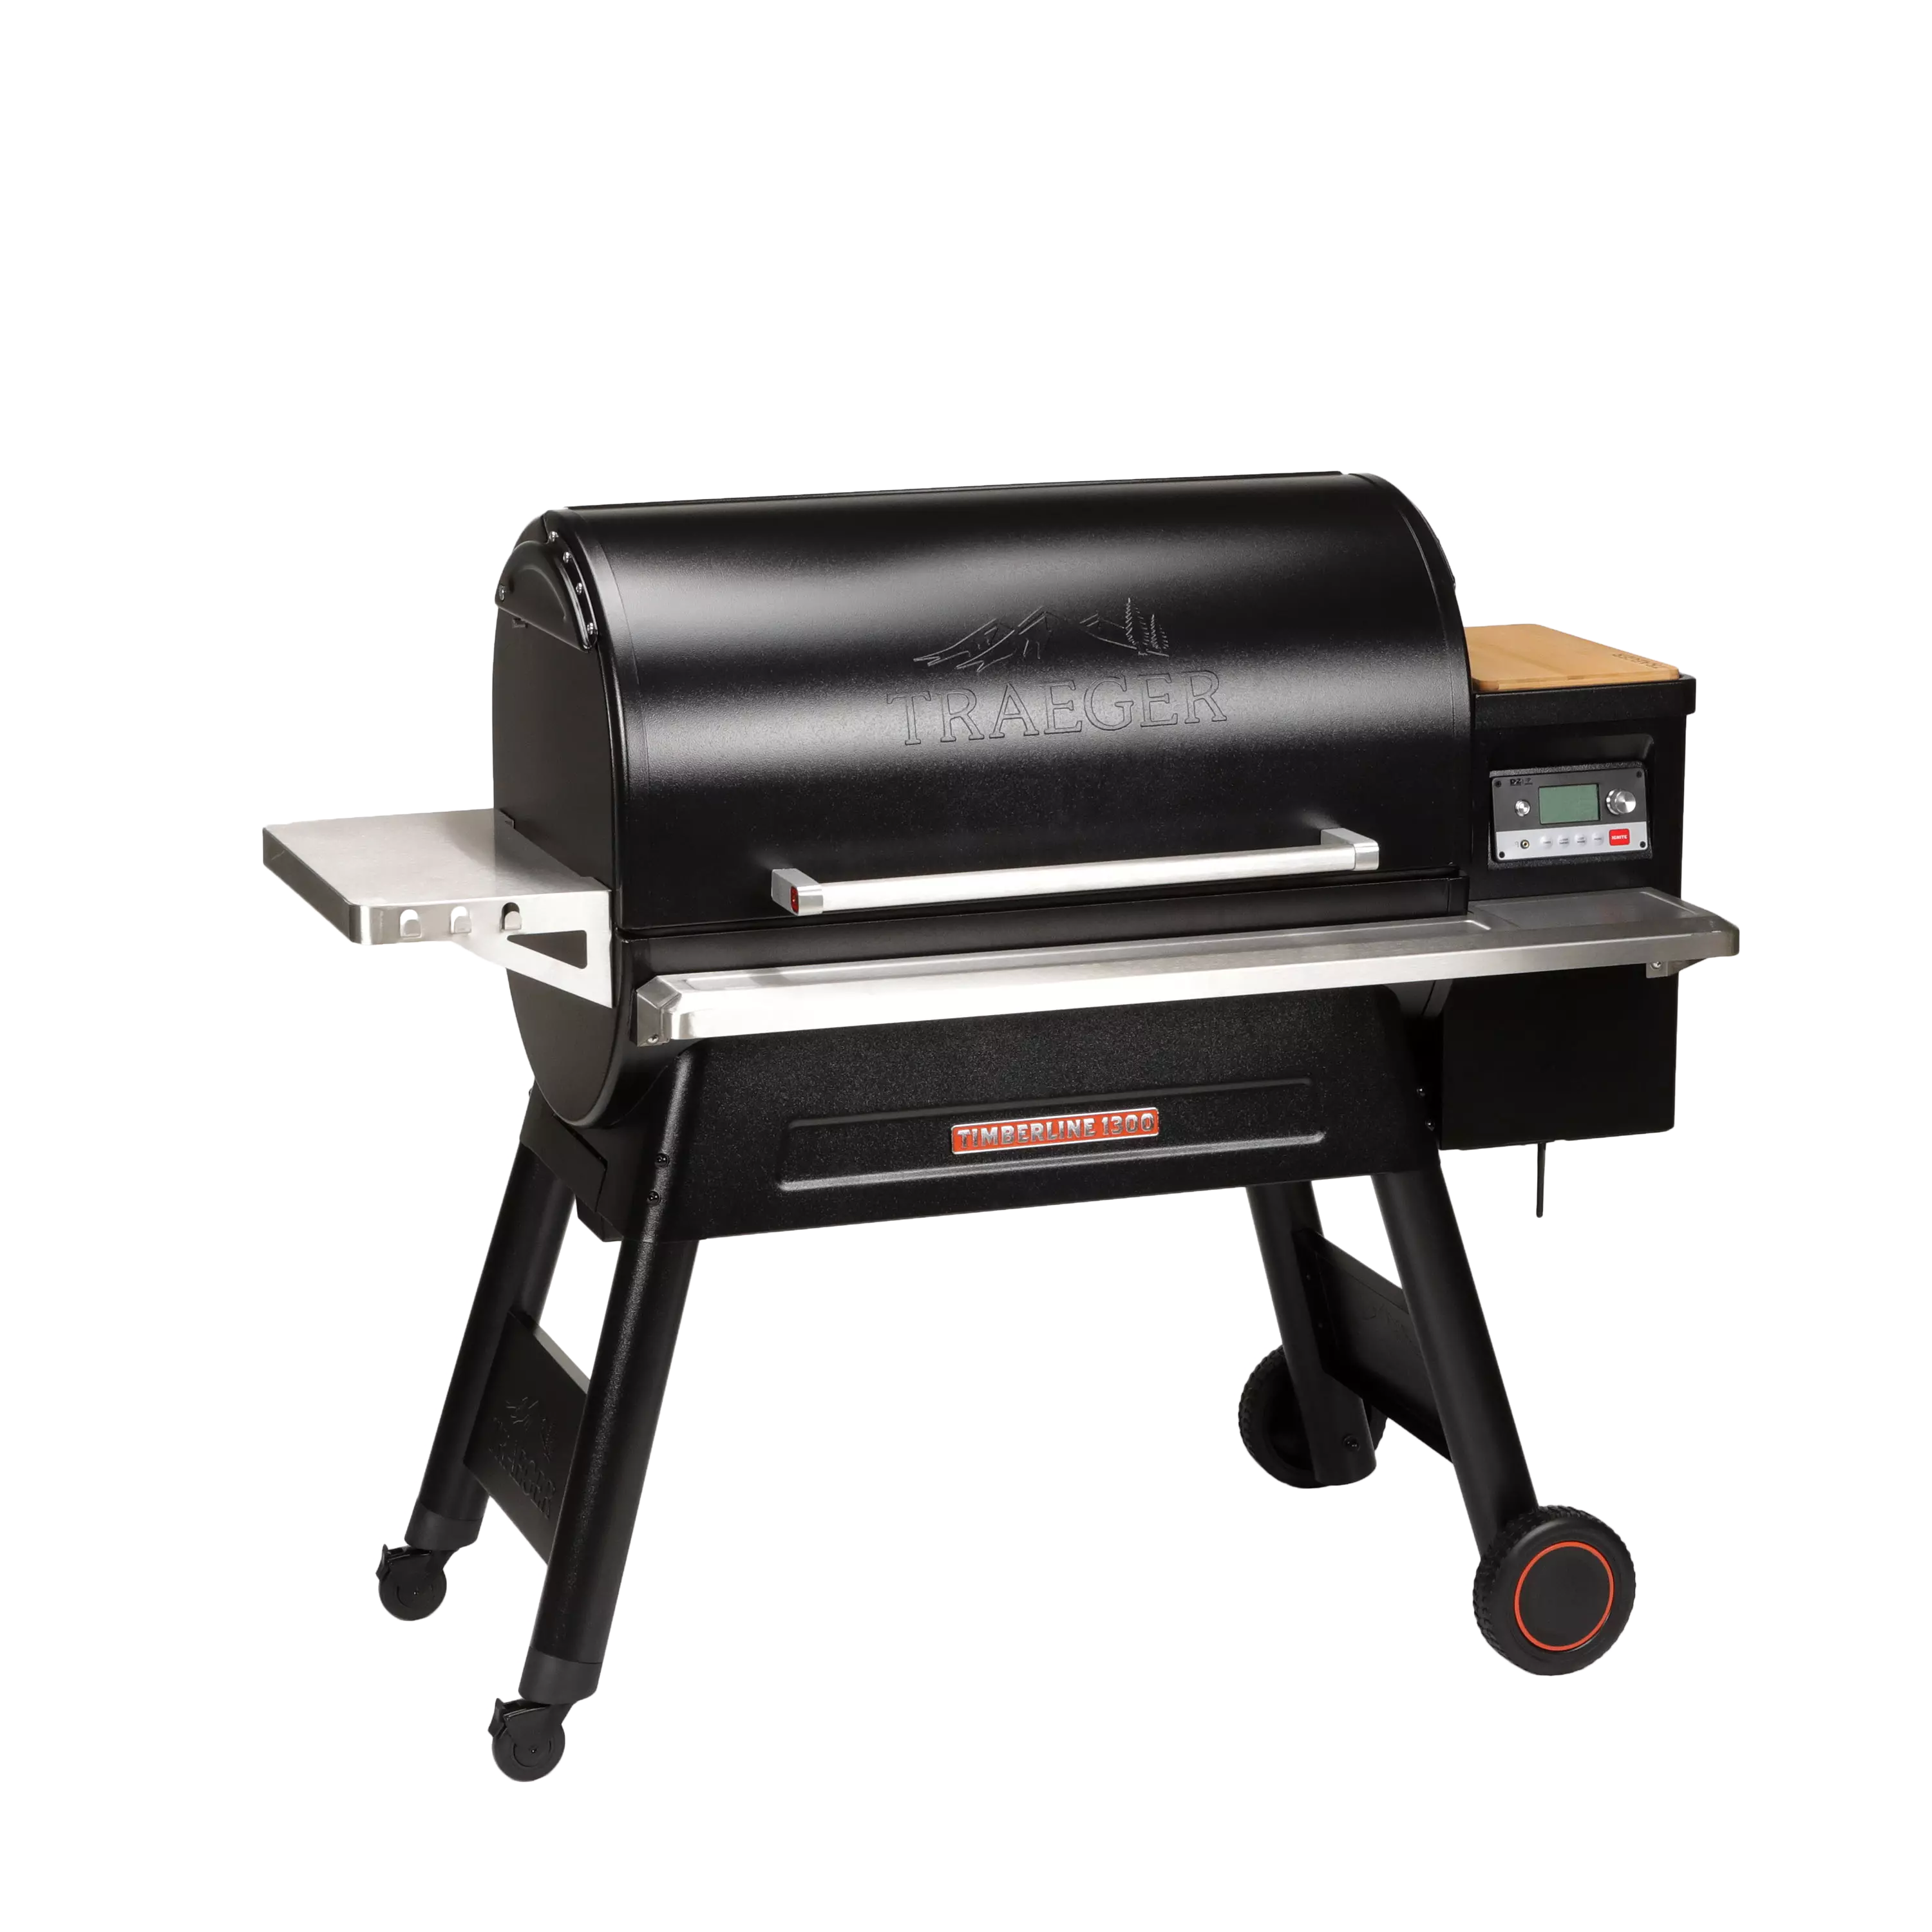 Pellet BBQ Timberline 1300 fully insulated with WiFi and meat probe - 1300  in² cooking space